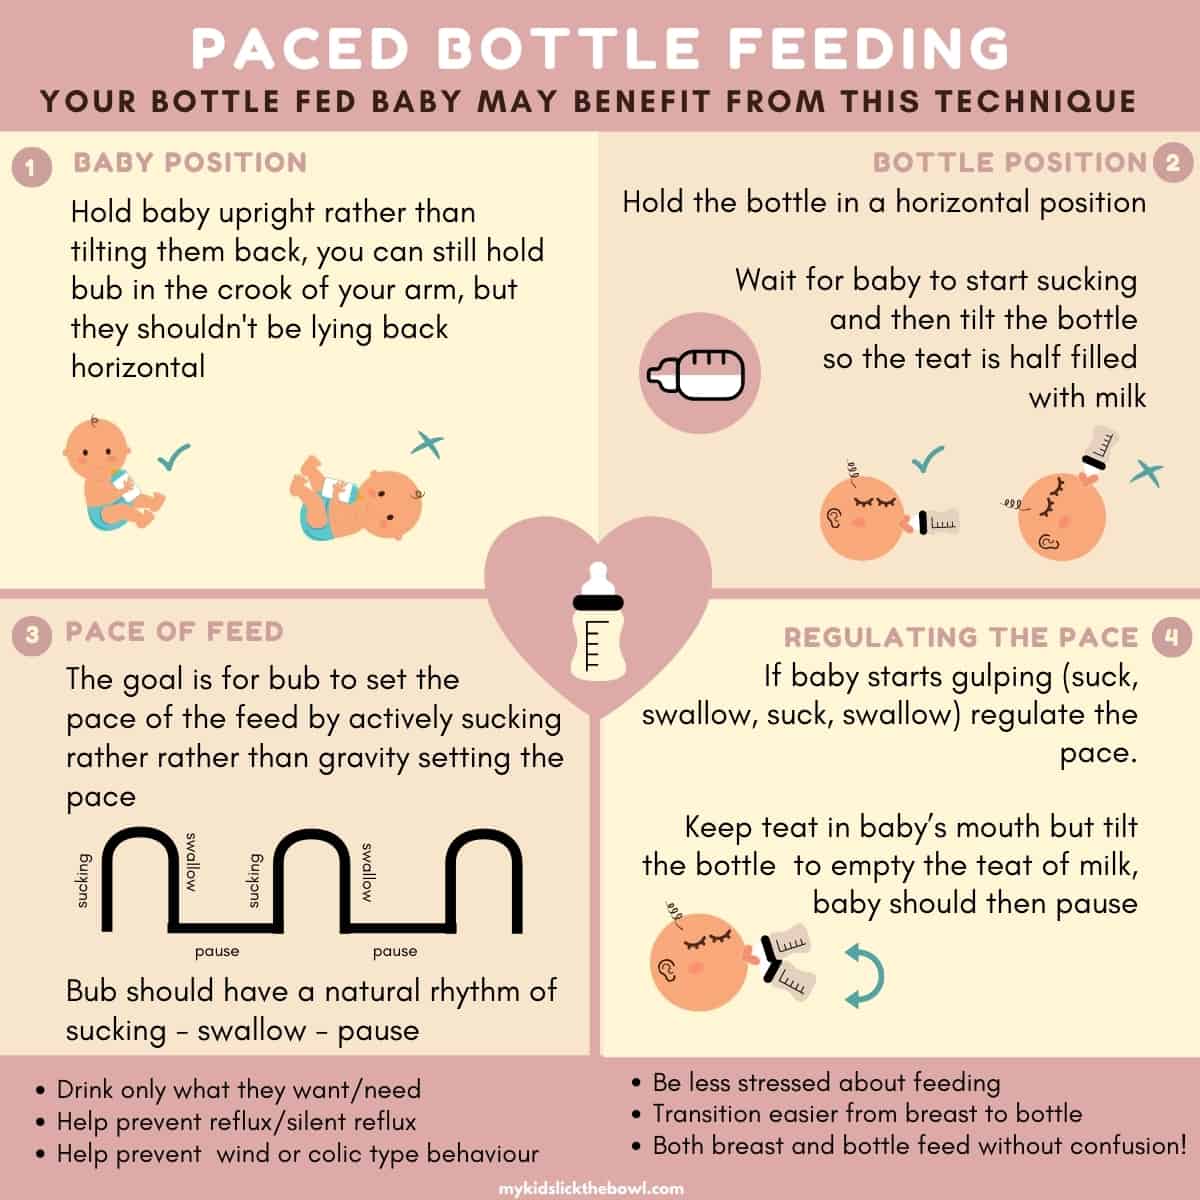 Infographic showing how to paced bottle feed a baby